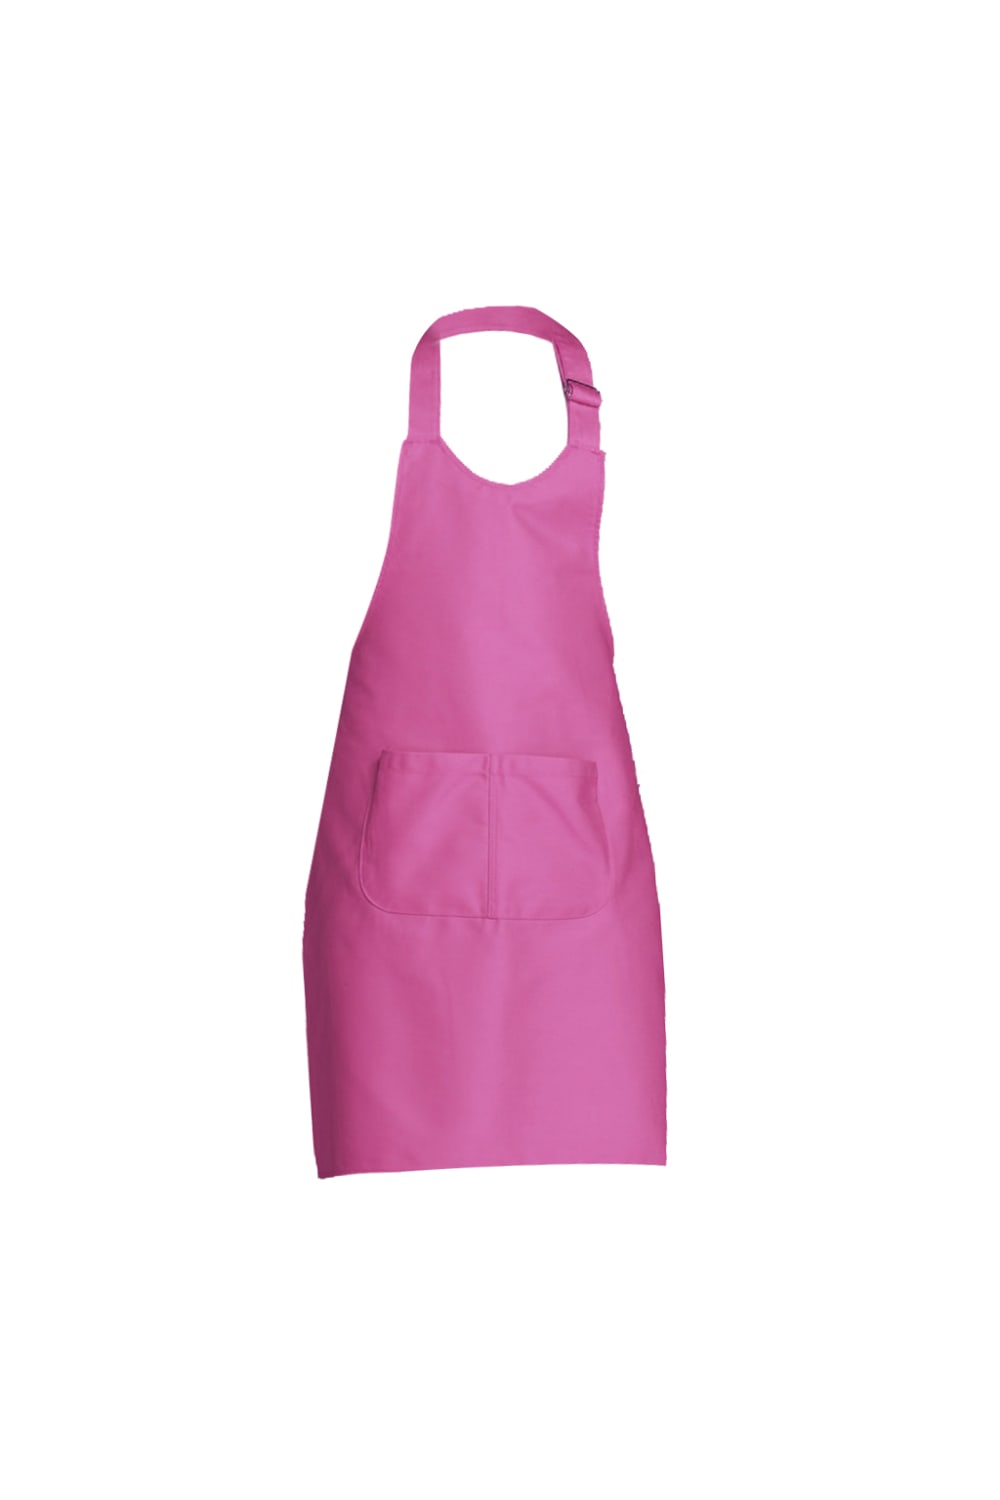 SOLS Childrens/Kids Gala Long Bib Cooking Apron (Orchid Pink) (ONE) (ONE)